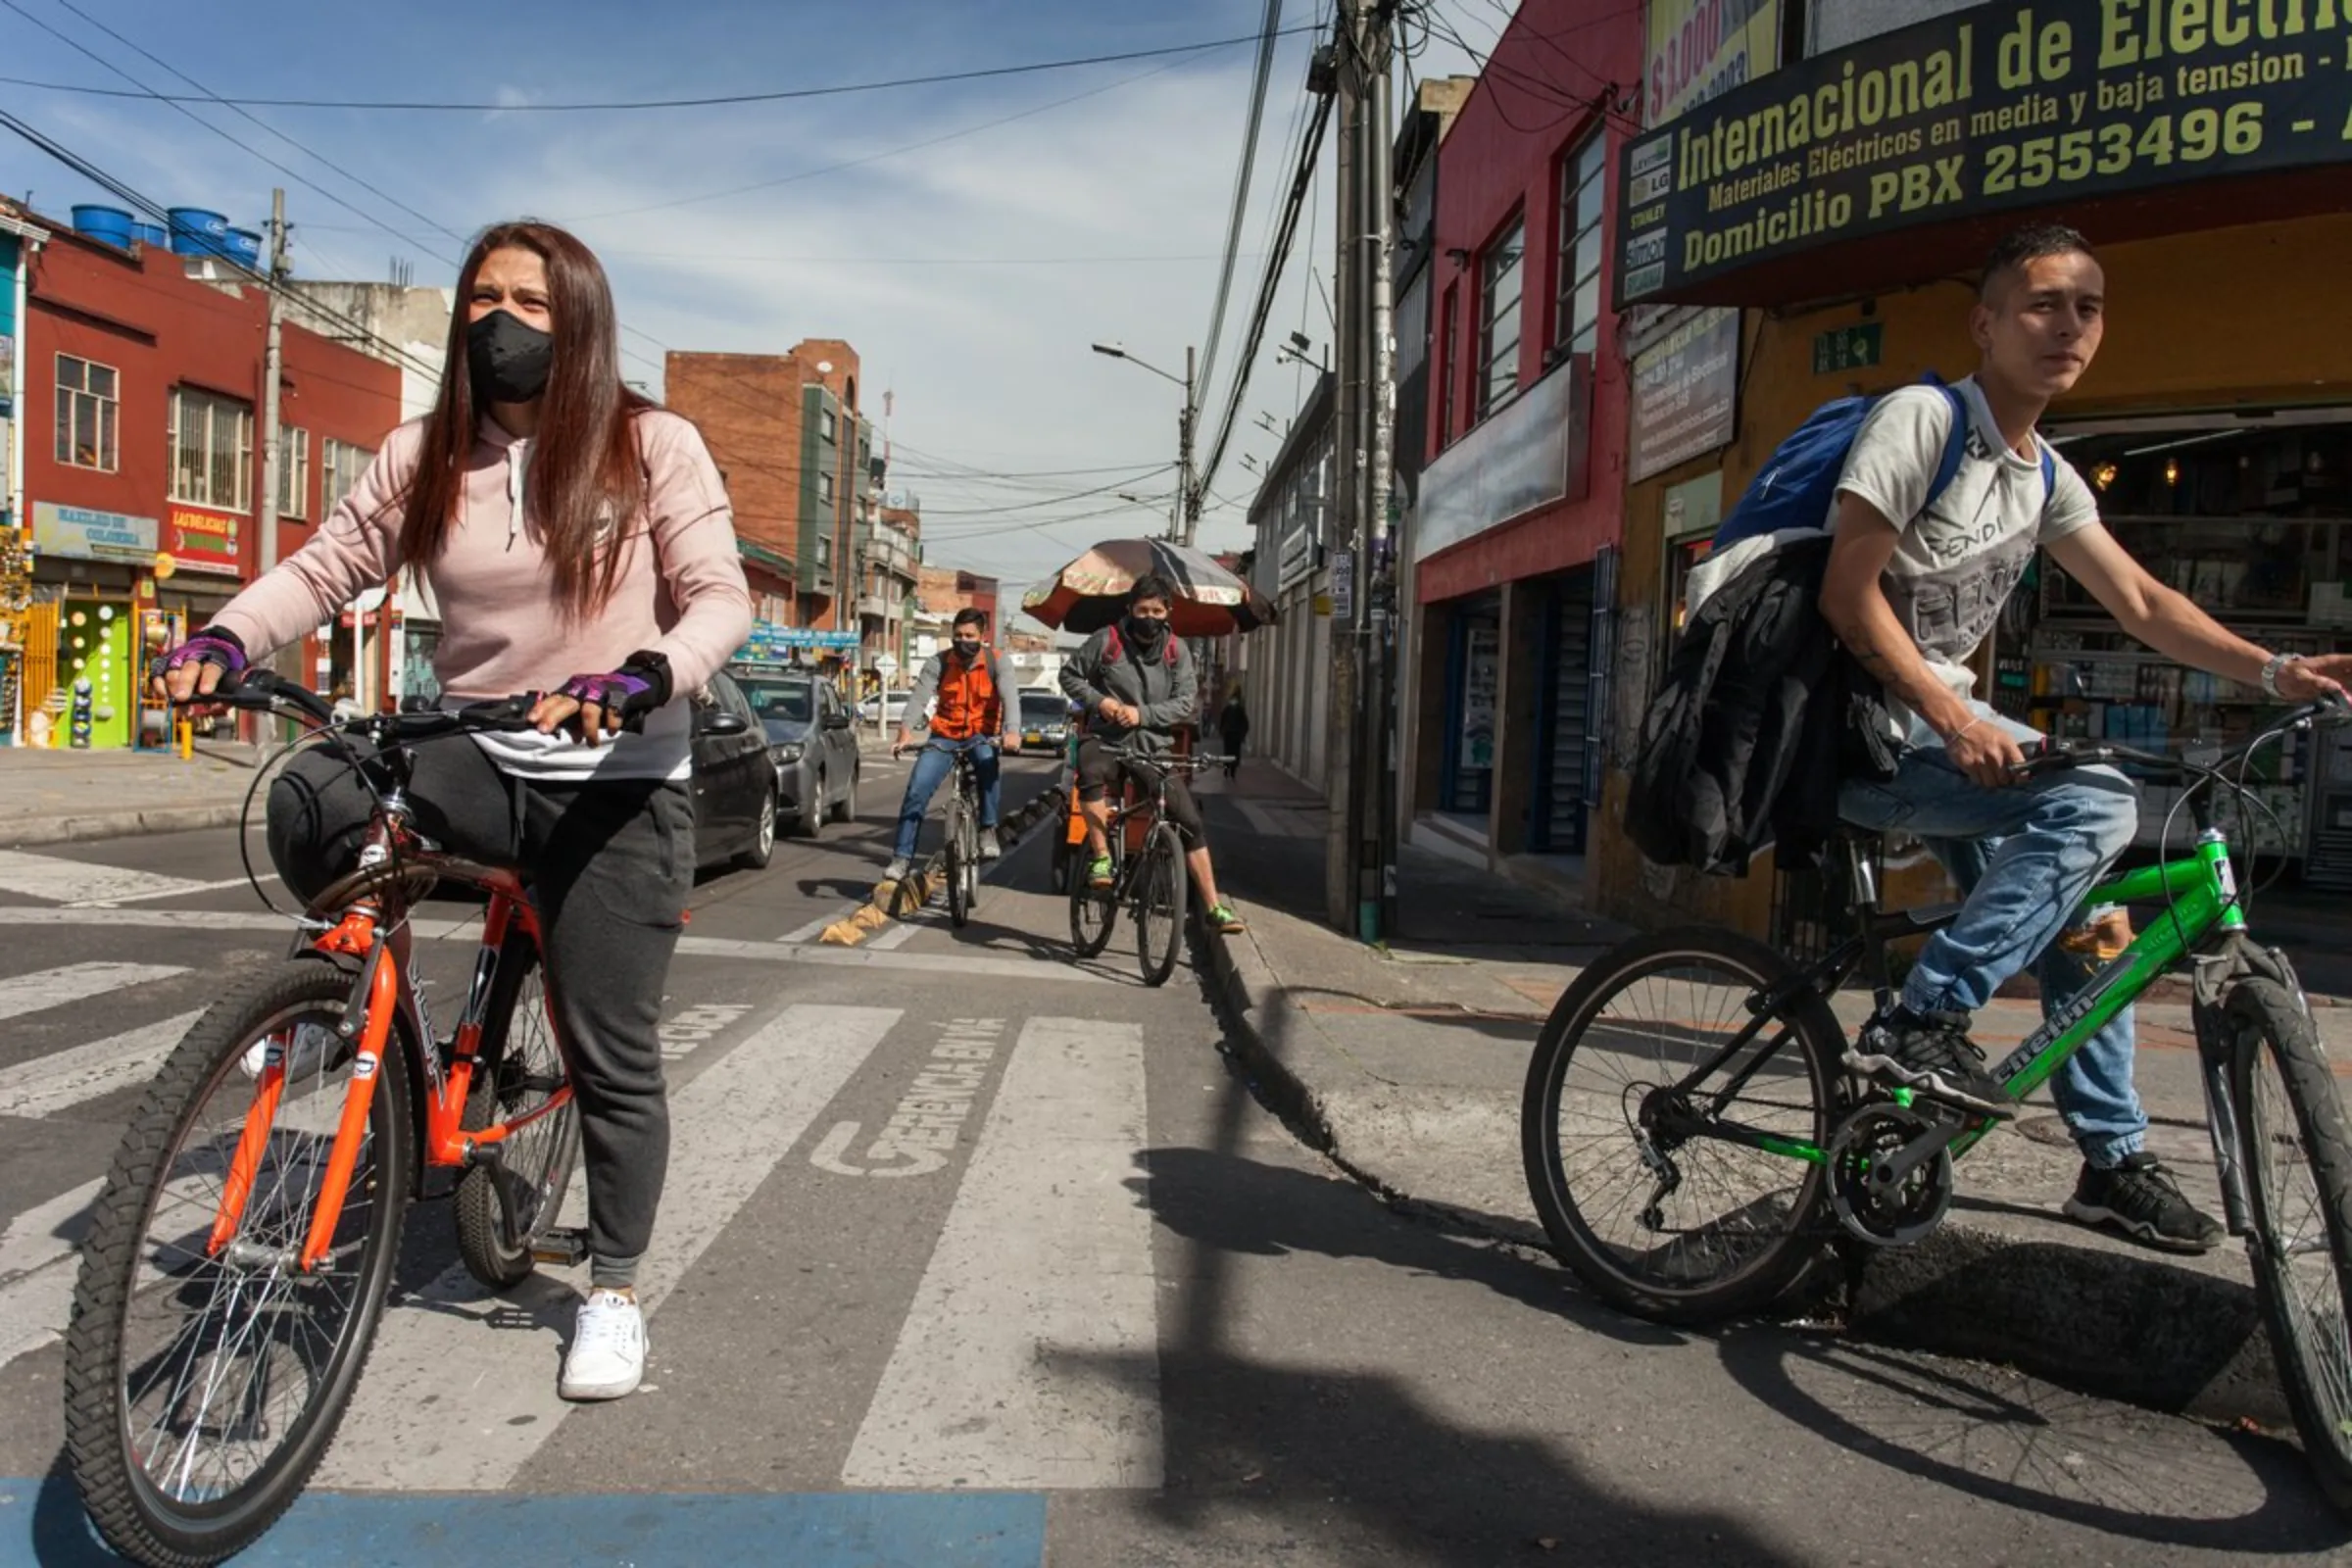 Cyclists ride in Bogota, Colombia, April 19, 2021. The city has expanded its already extensive network of cycle lanes during the coronavirus pandemic, to help provide a virus-safe means of transport